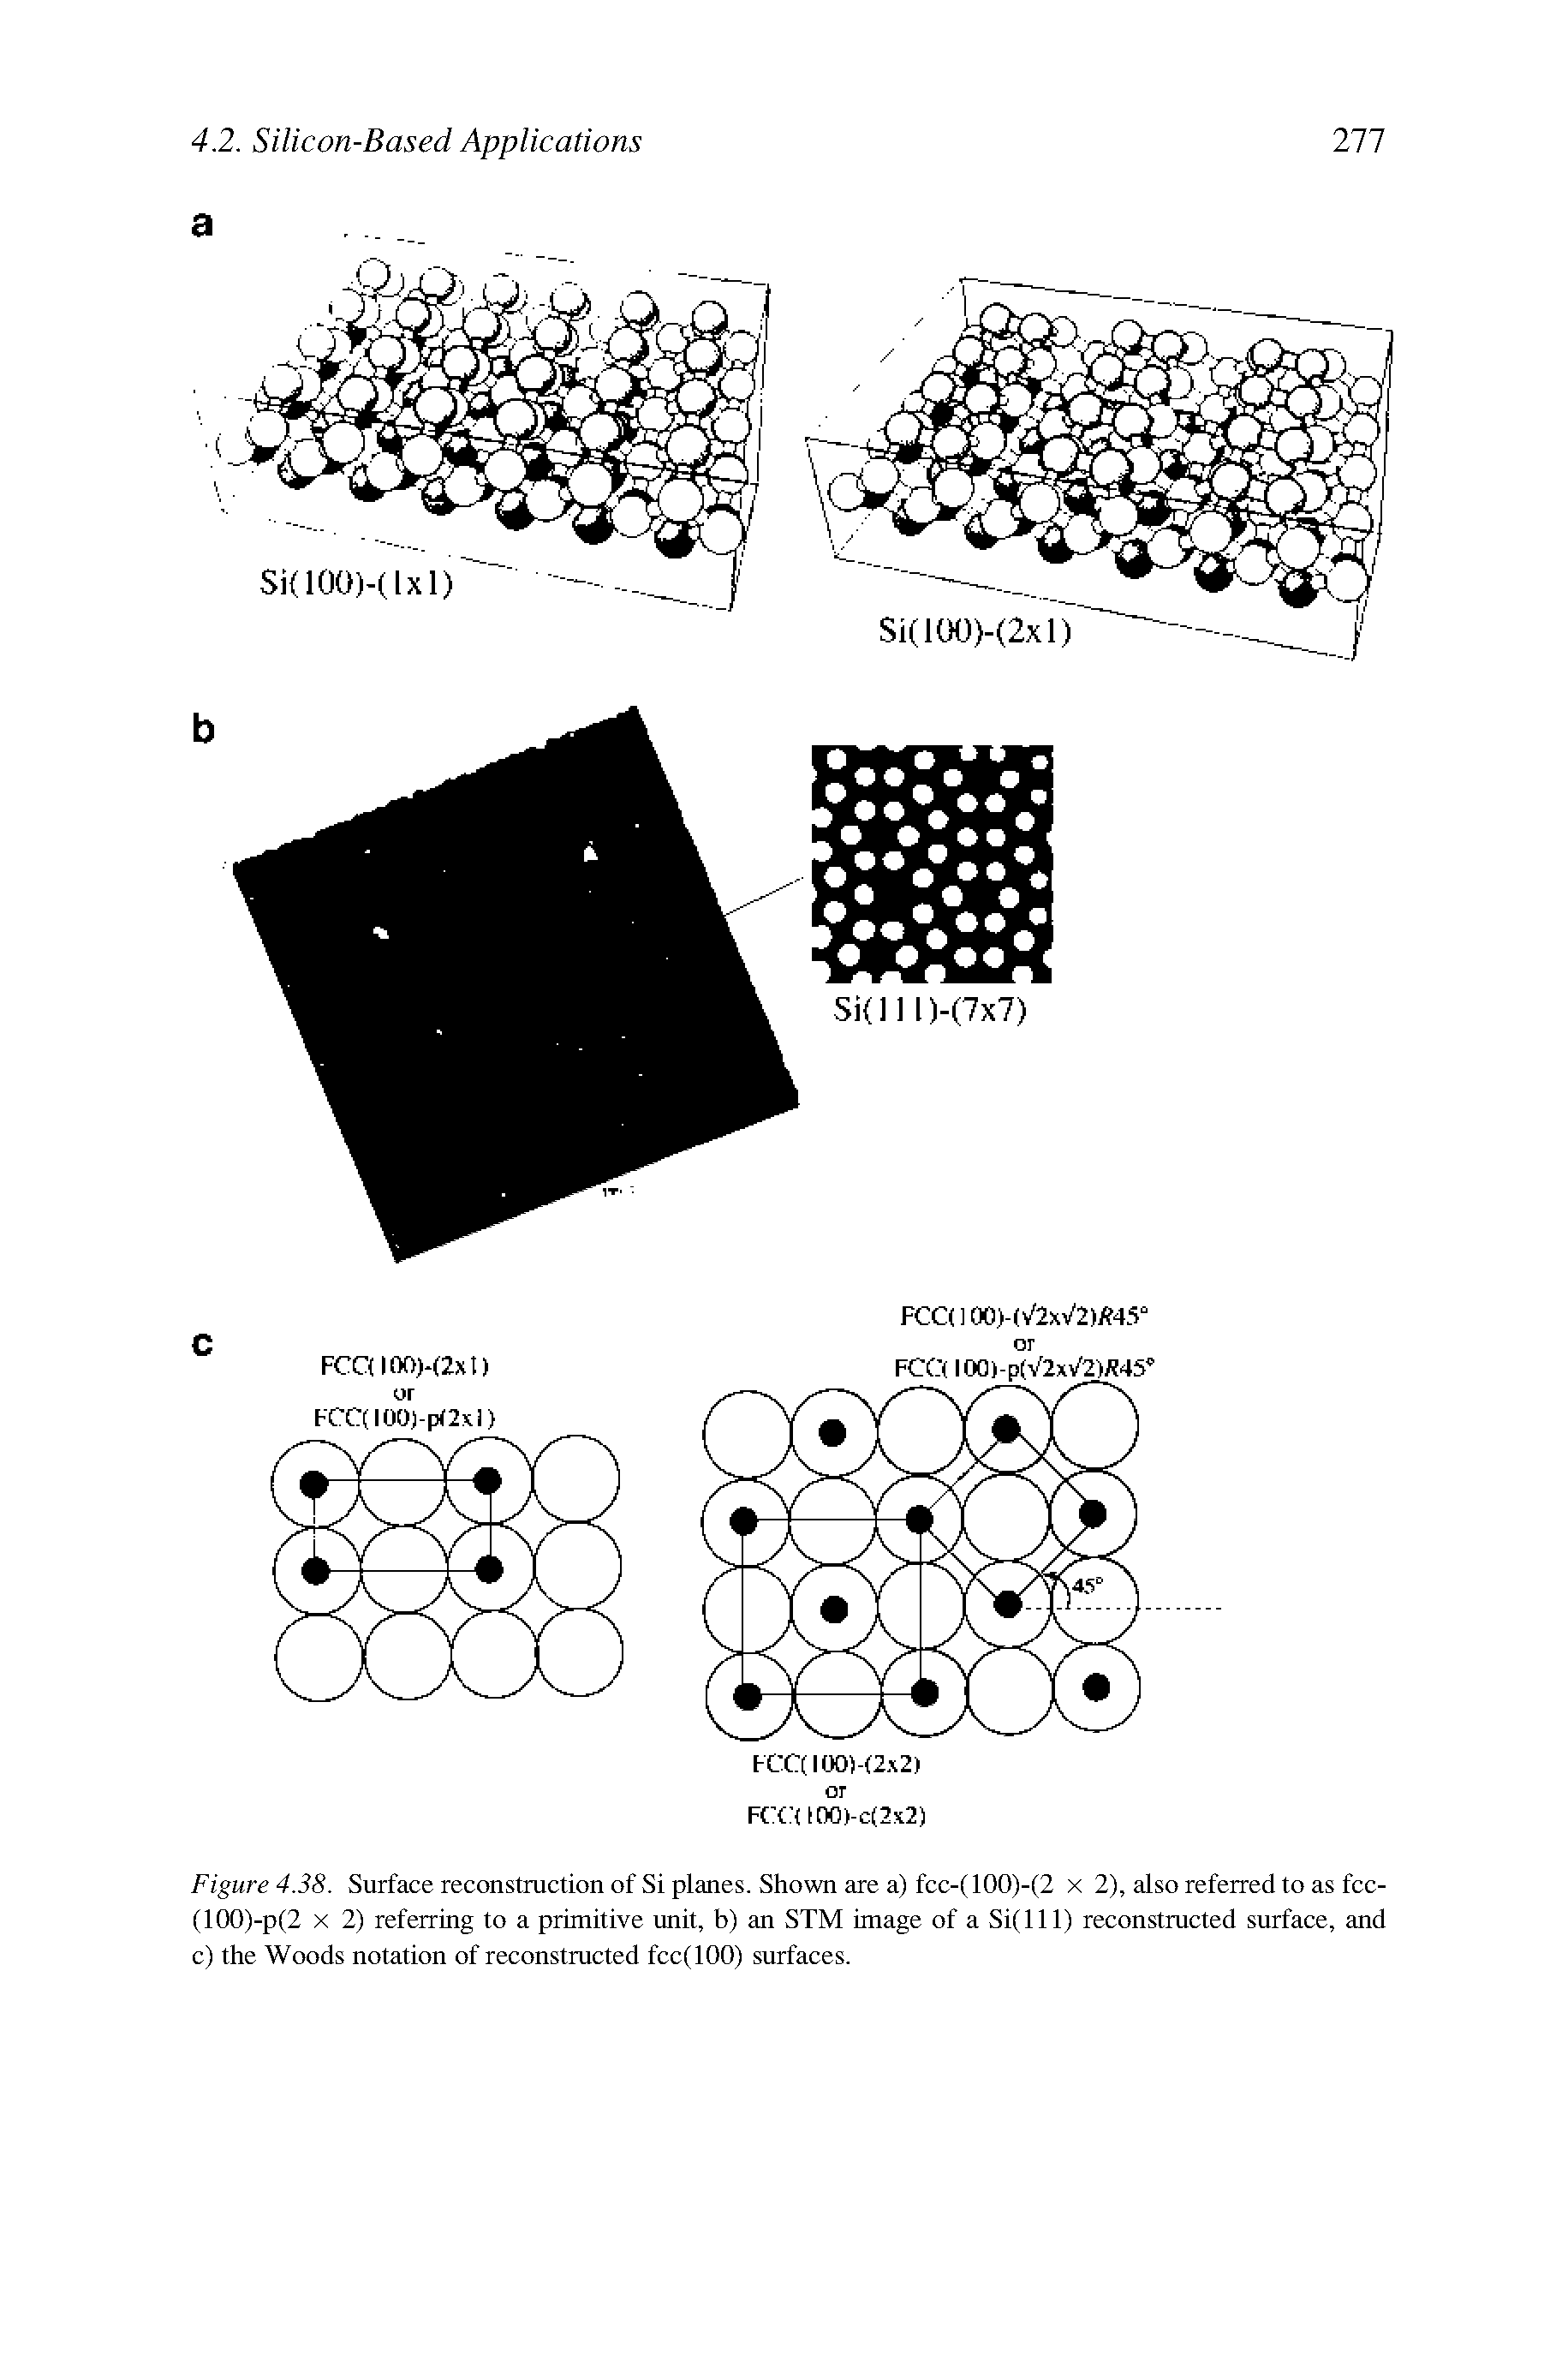 Figure 4.38. Surface reconstruction of Si planes. Shown are a) fcc-(100)-(2 x 2), also referred to as fcc-(100)-p(2 X 2) referring to a primitive unit, b) an STM image of a Si(lll) reconstructed surface, and c) the Woods notation of reconstructed fcc(lOO) surfaces.